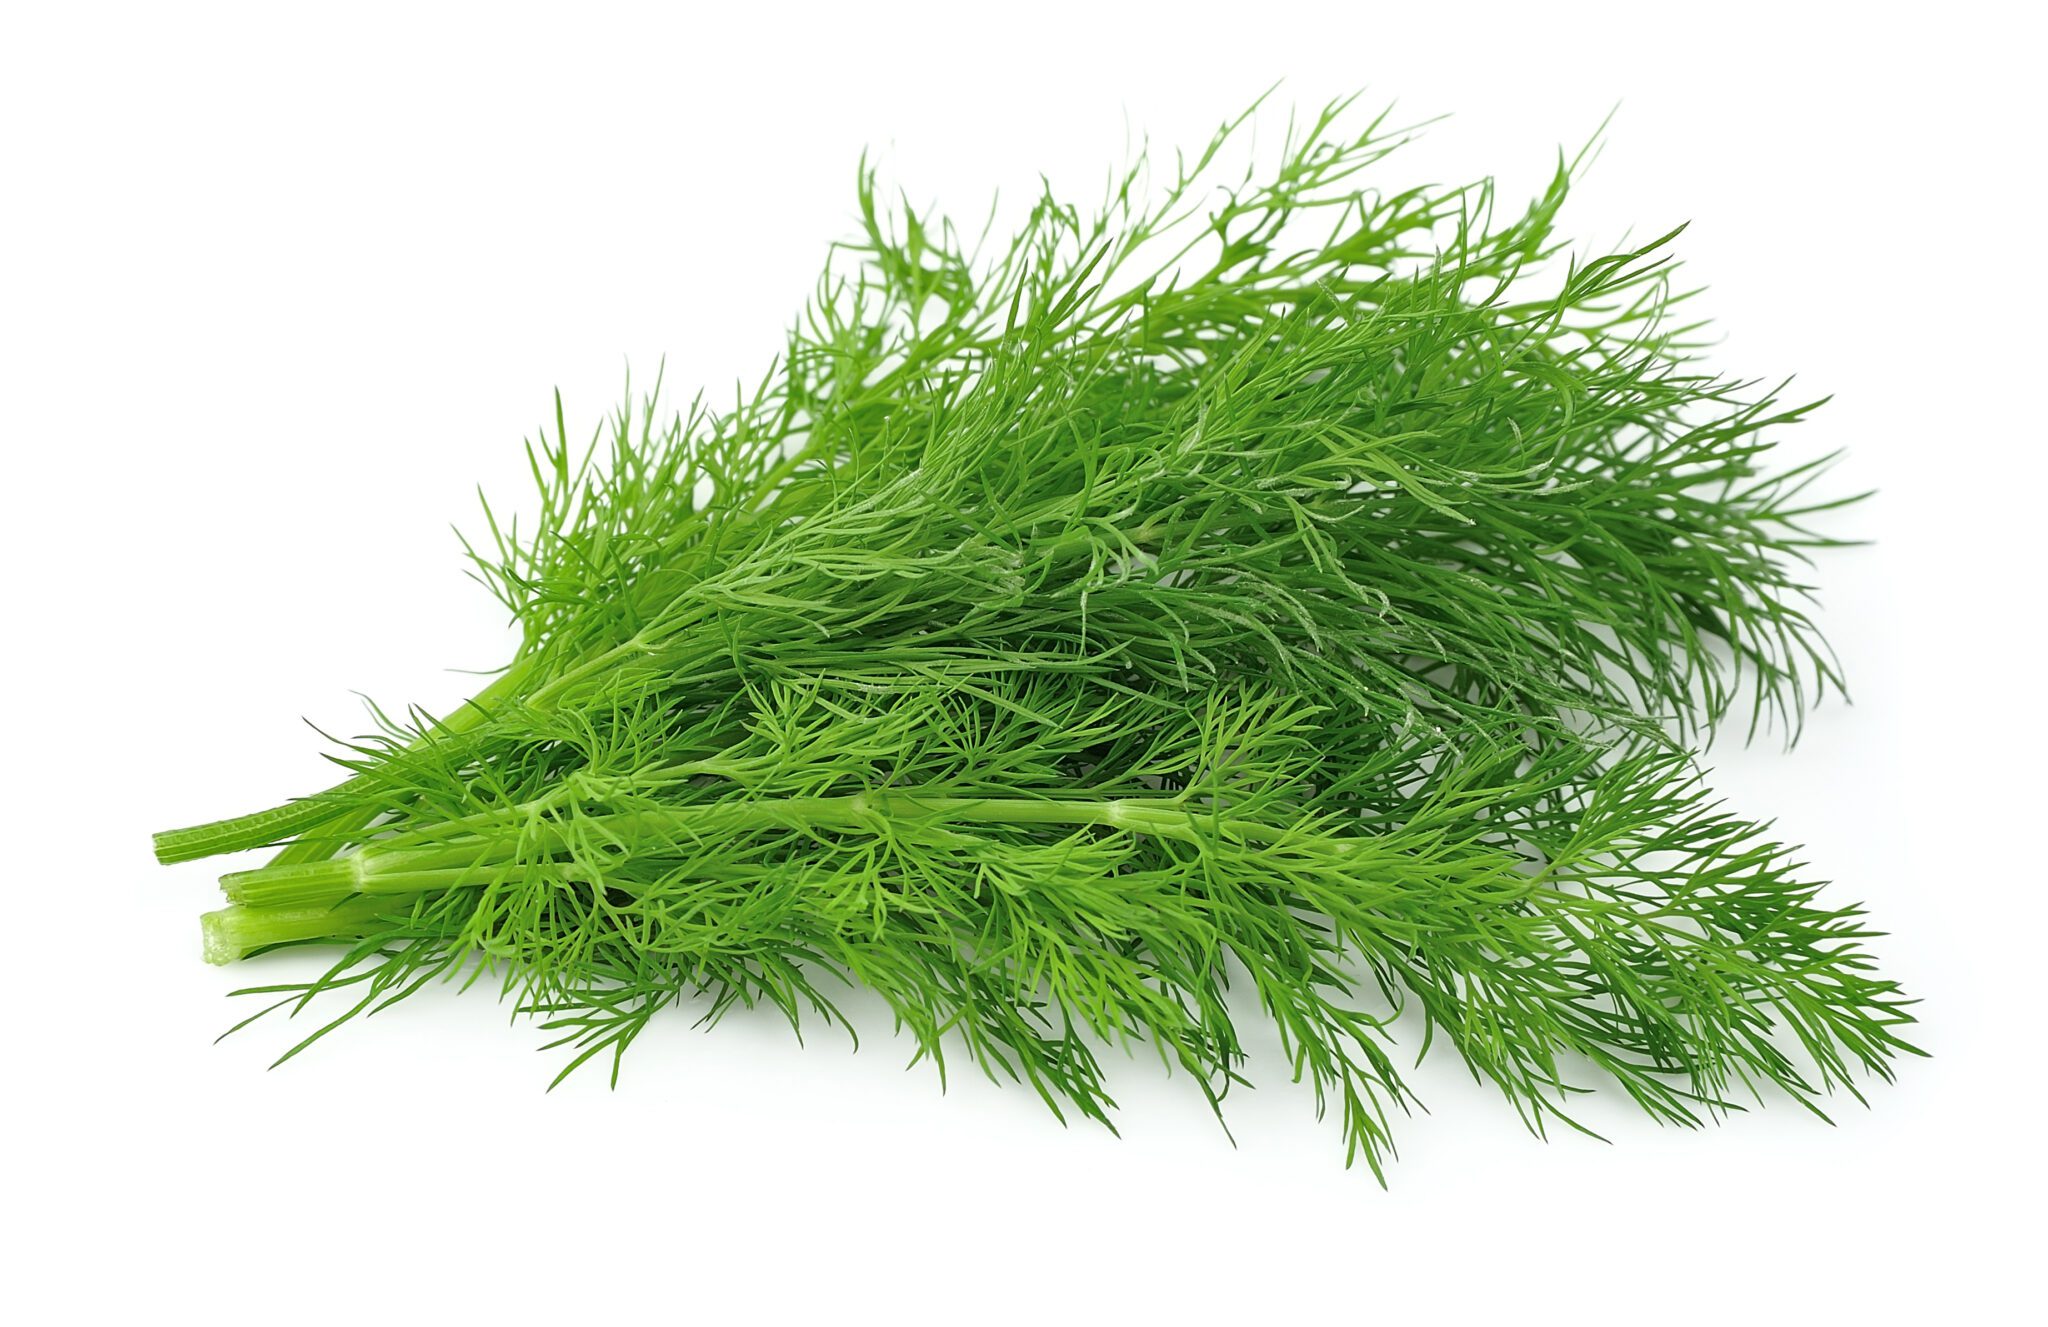 Fennel on a white background. Fresh dill herbs.